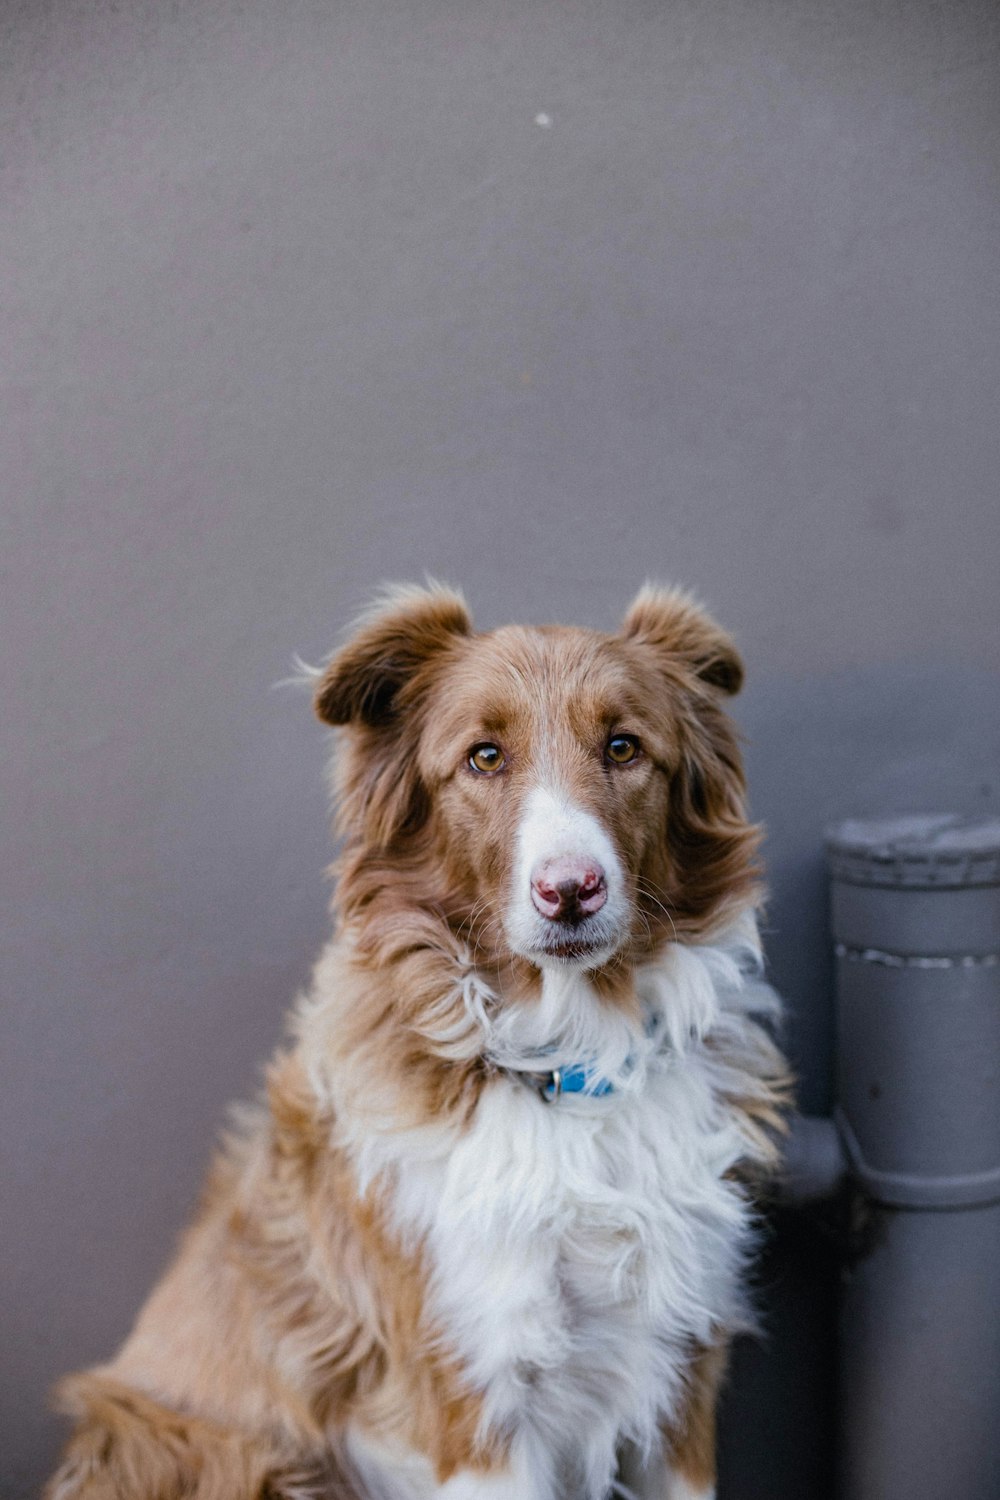 a brown and white dog sitting next to a trash can